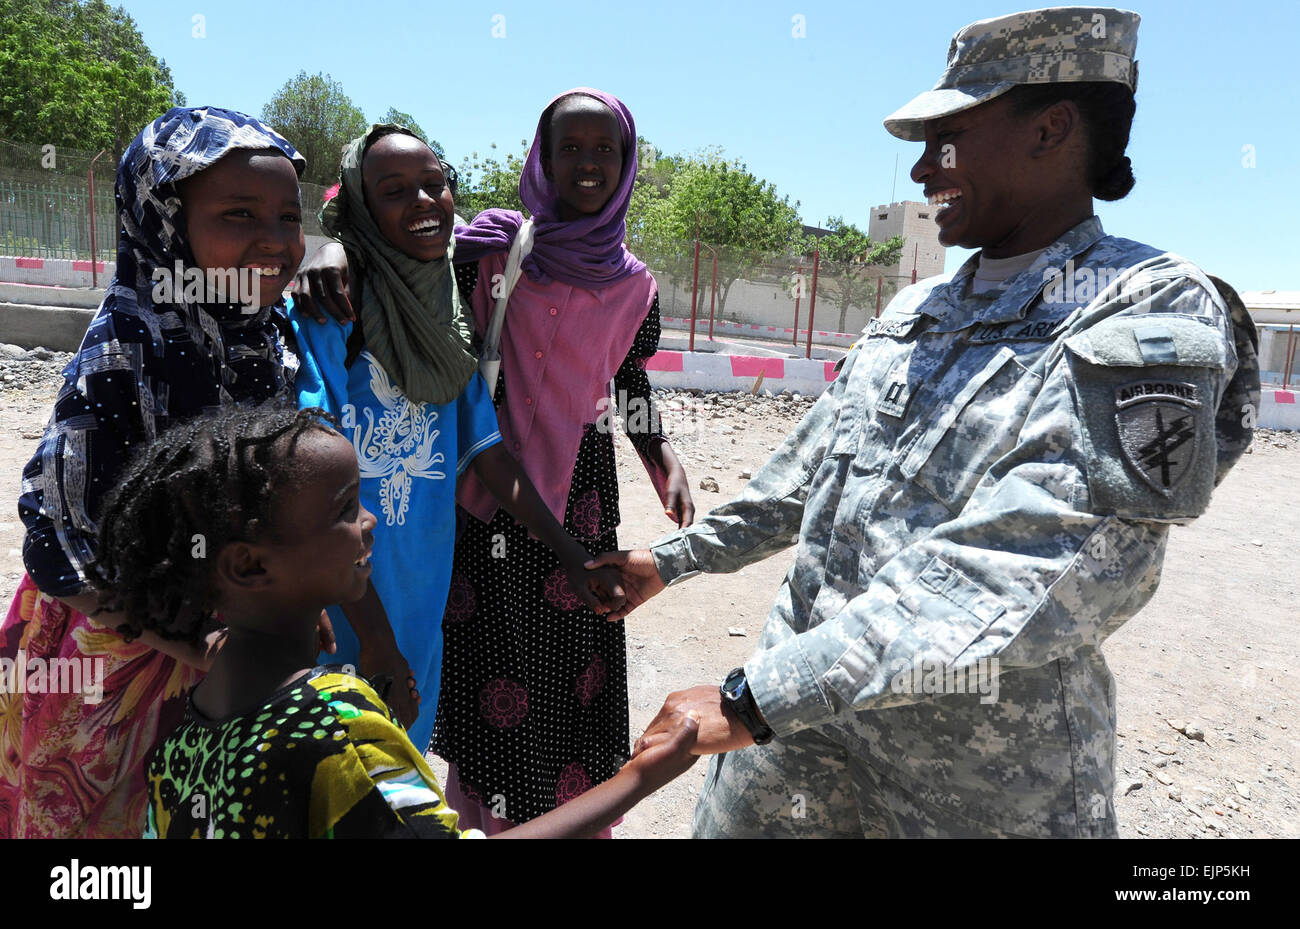 U.S. Army Capt. Courtney Sanders right, with the 402nd Civil Affairs Battalion, laughs with a group of girls in front of the Dikhil High School in Dikhil, Djibouti, on April 19, 2011.  The Battalion was working on renovating the school.  The project, which began April 16, is scheduled to refurbish six classrooms, the school's roof and an office.   Master Sgt. Dawn Price, U.S. Air Force. Stock Photo